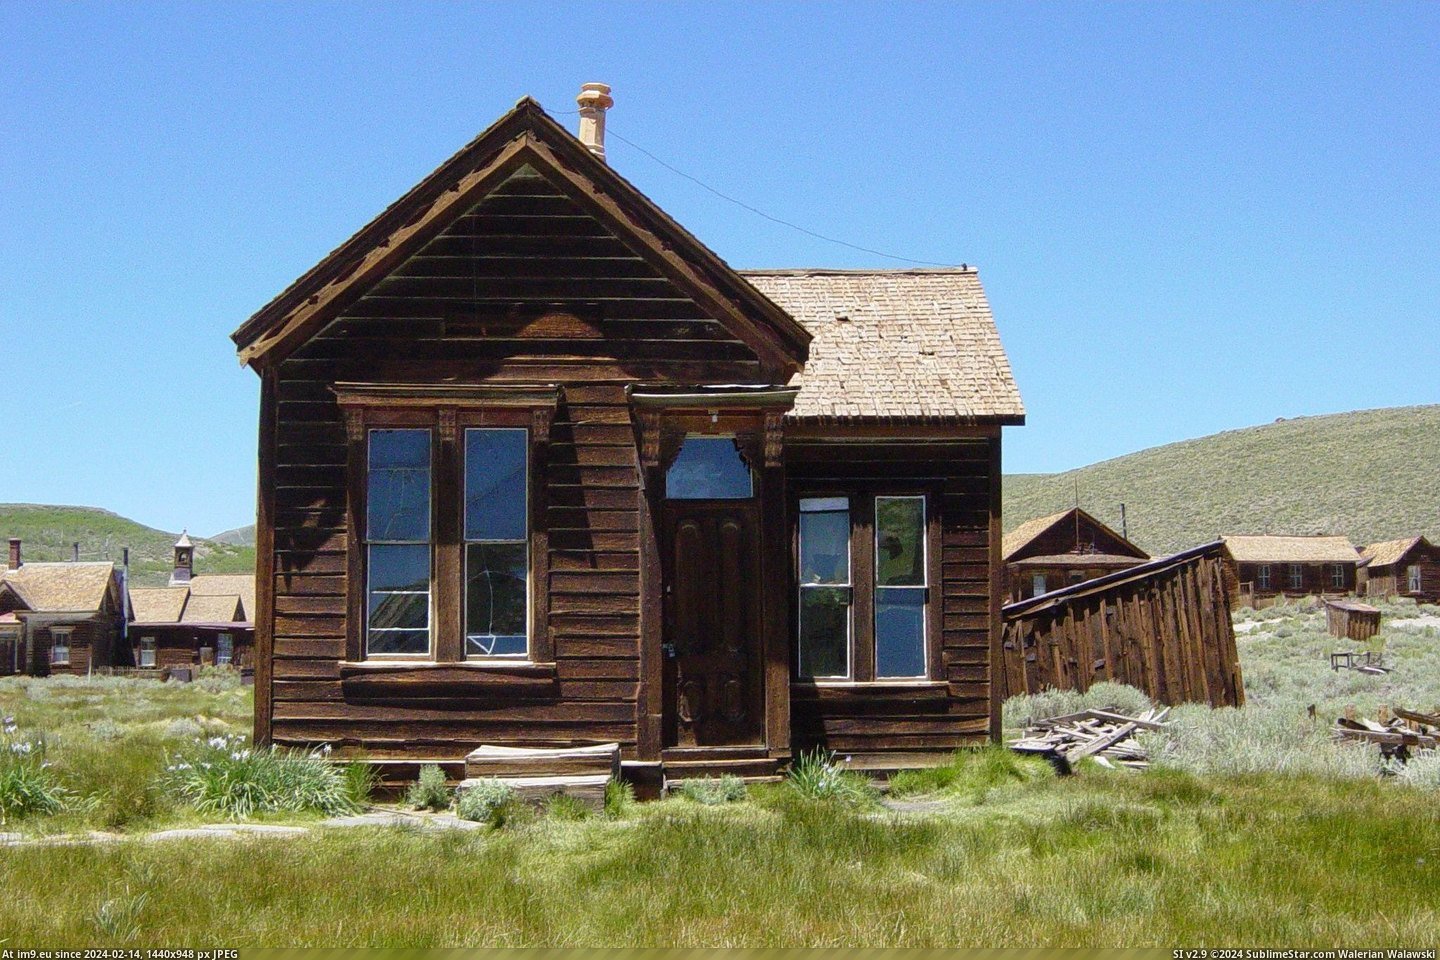 Johl House In Bodie, California (in Bodie - a ghost town in Eastern California)